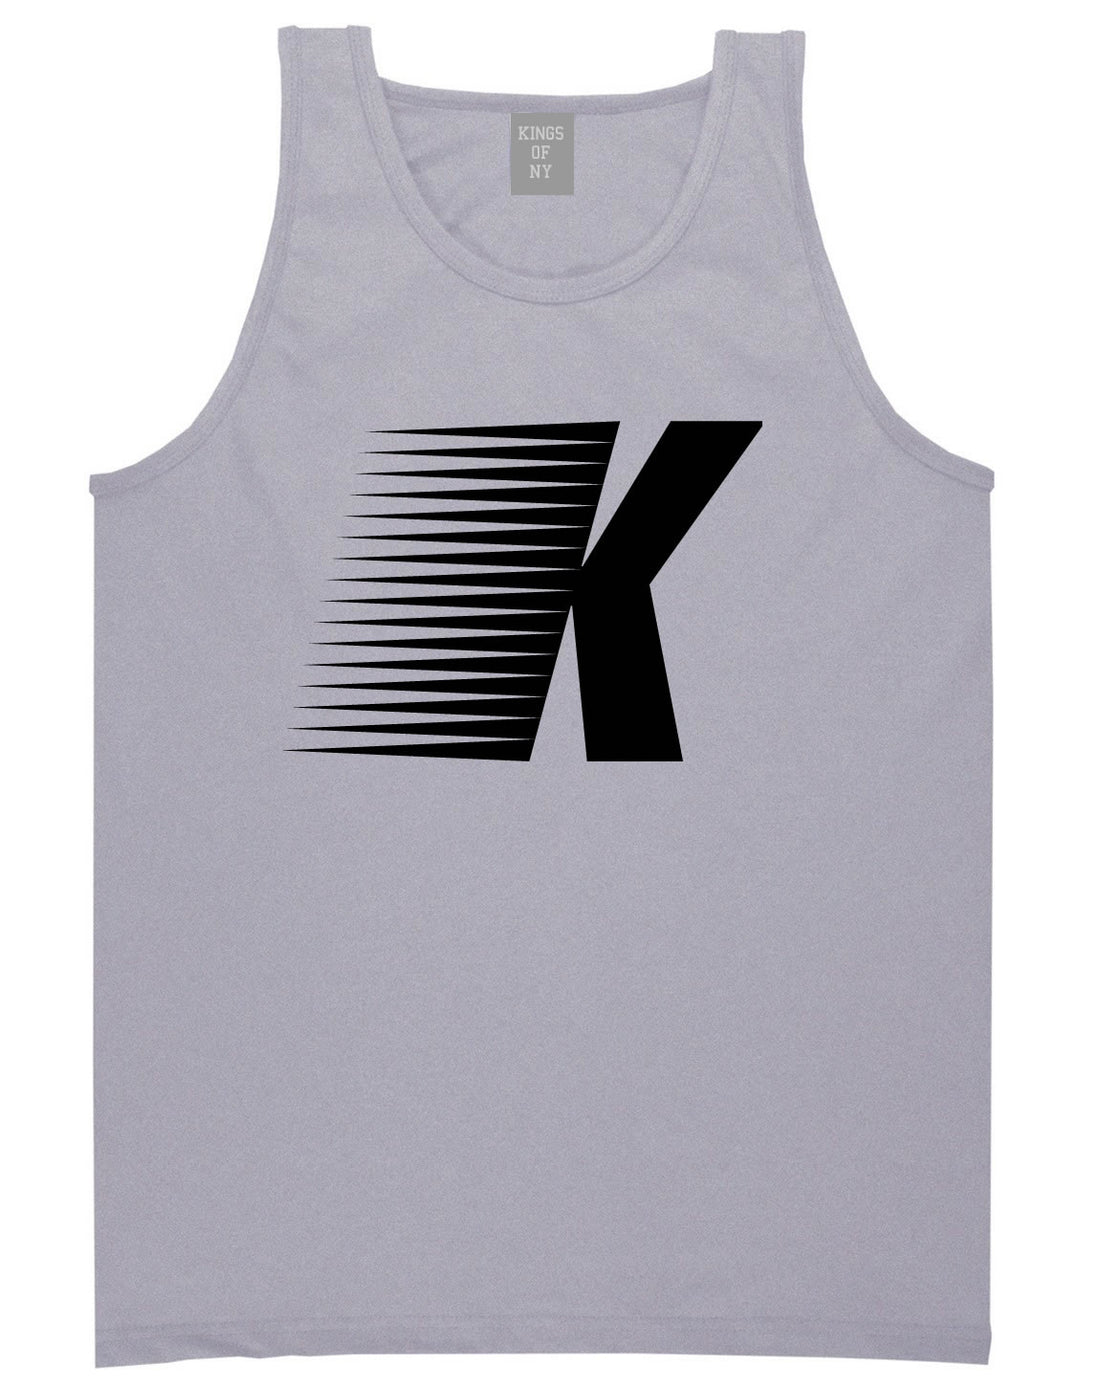 Flash K Running Fitness Style Tank Top in Grey By Kings Of NY